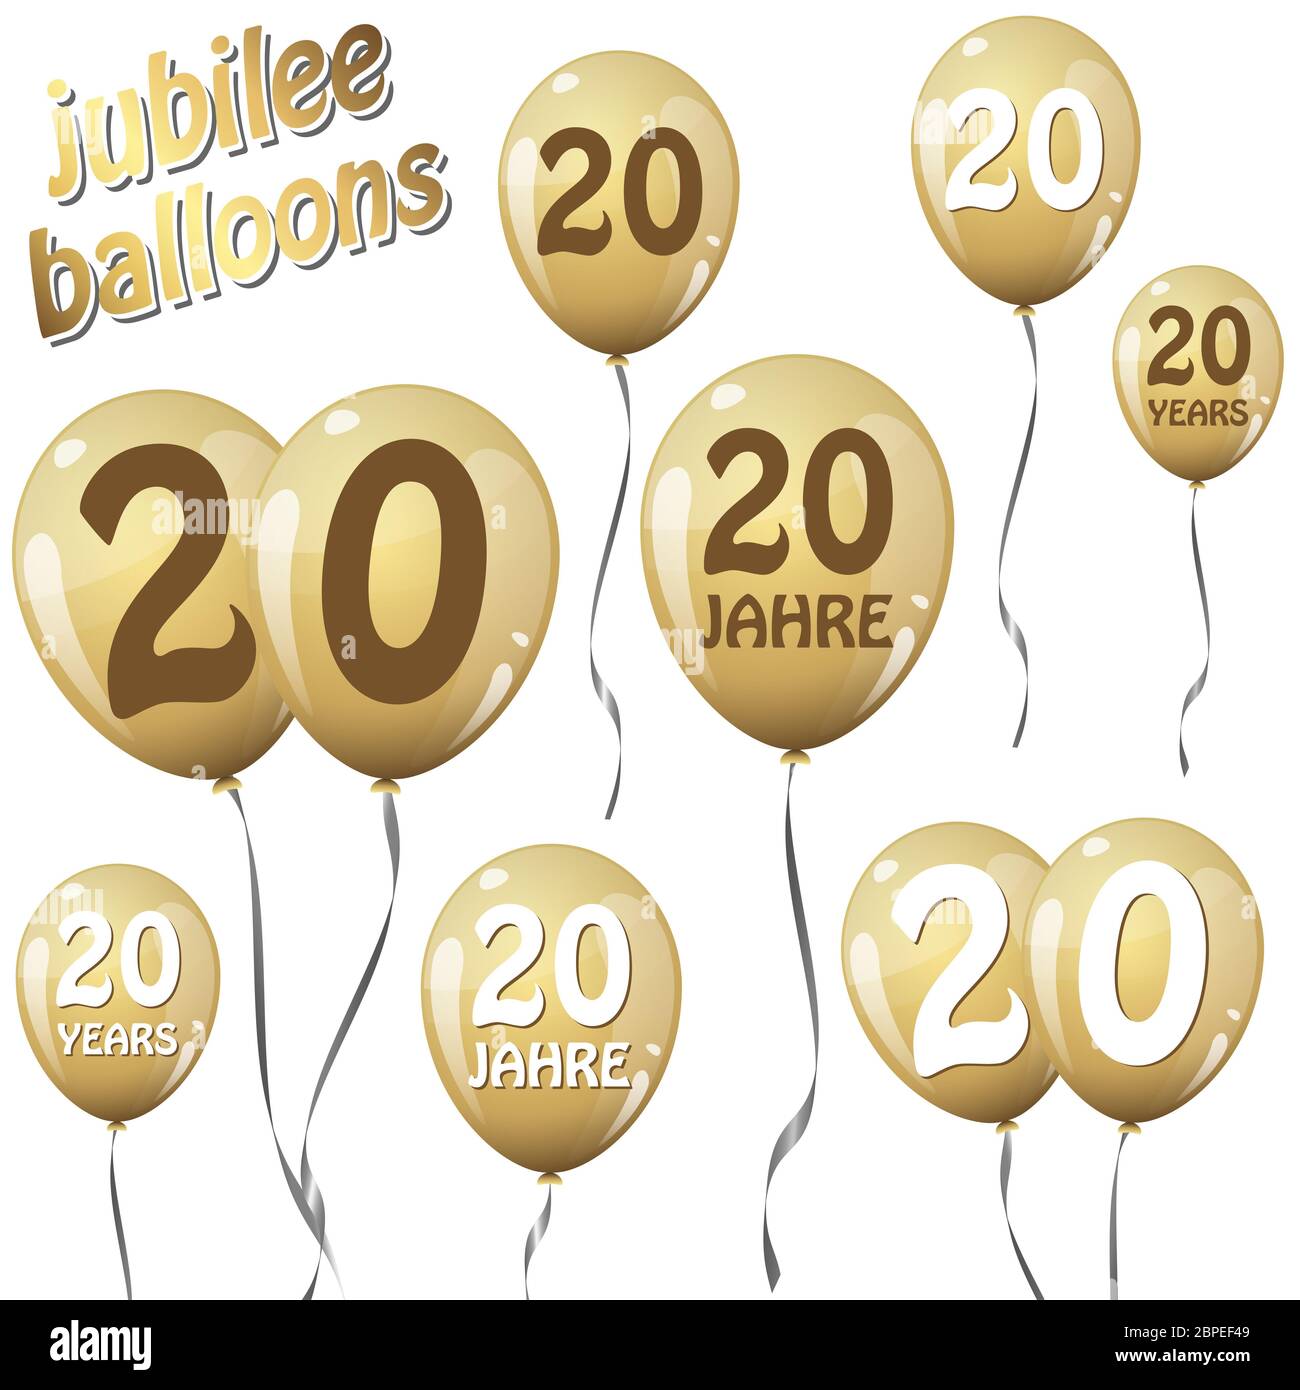 golden jubilee balloons for 20 years in english and german Stock Photo